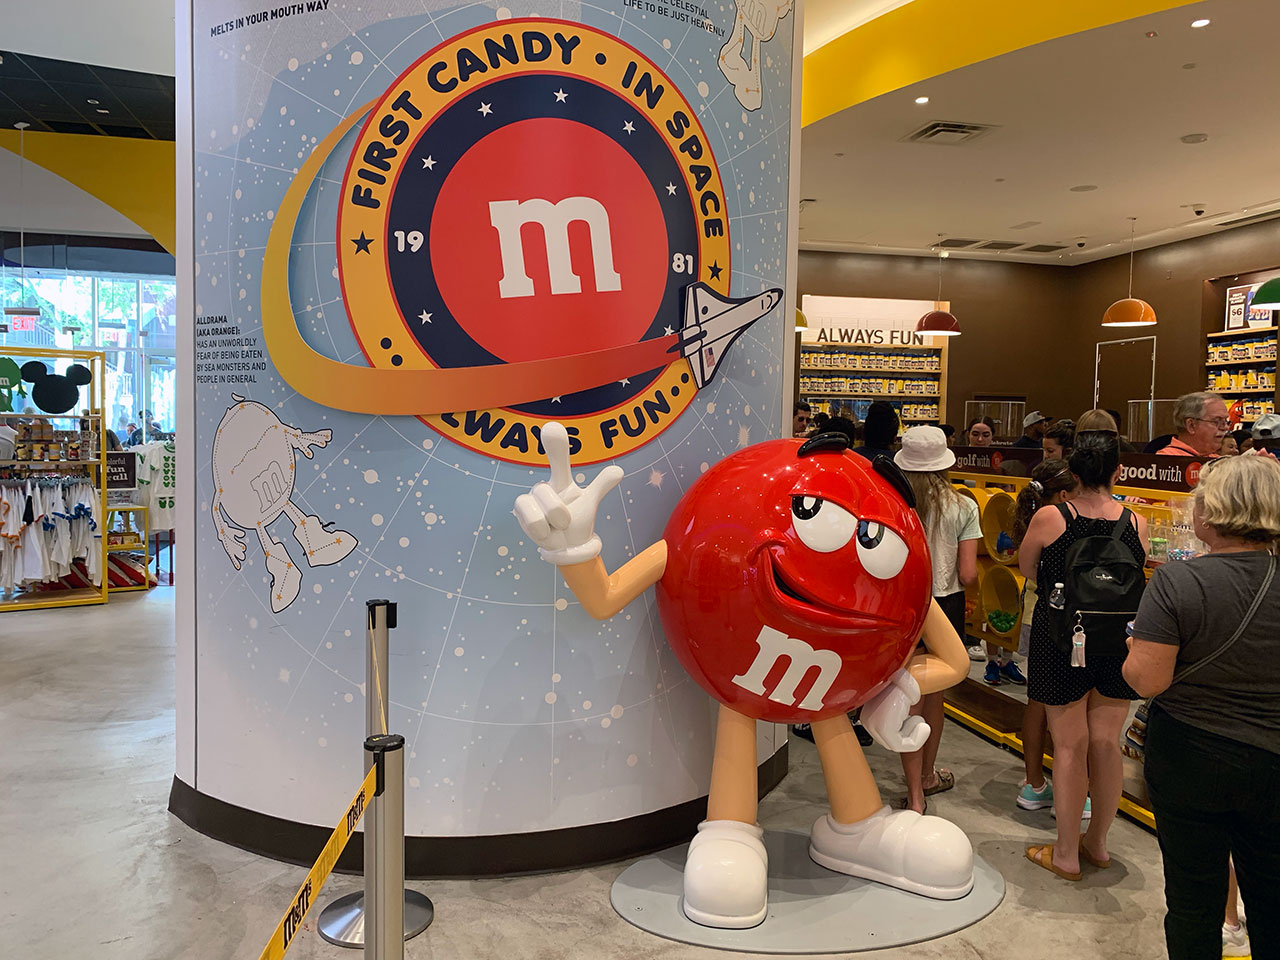 The "First Candy in Space" display in the M&M's Store at Disney Springs in Orlando, Florida celebrates the candies' space history but dates it back to 1981.